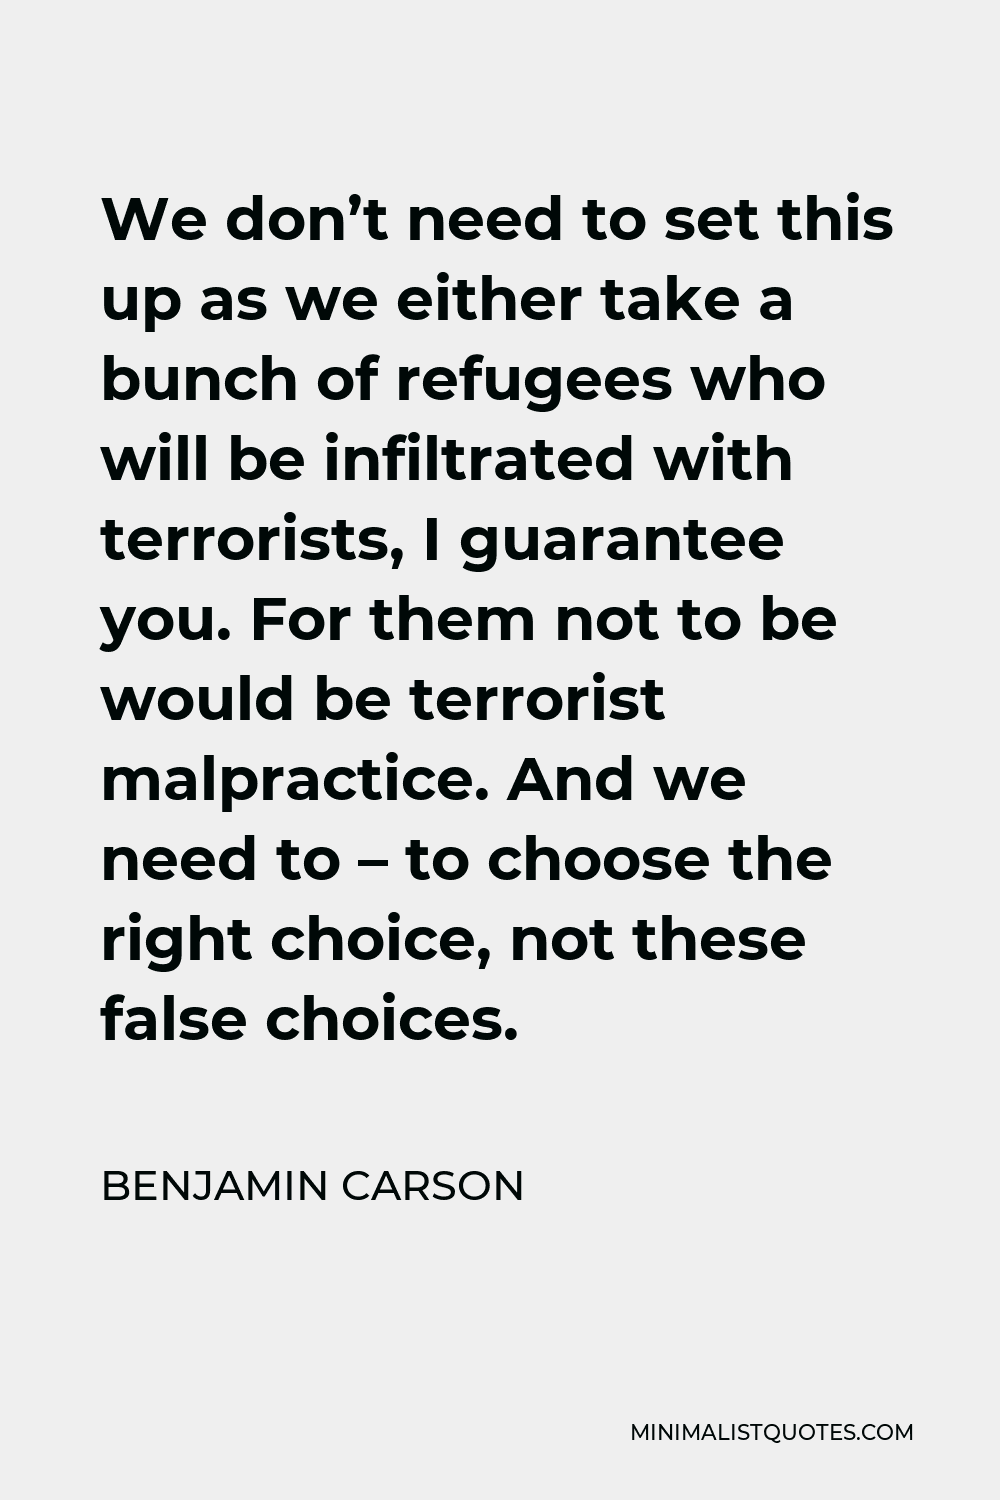 Benjamin Carson Quote - We don’t need to set this up as we either take a bunch of refugees who will be infiltrated with terrorists, I guarantee you. For them not to be would be terrorist malpractice. And we need to – to choose the right choice, not these false choices.